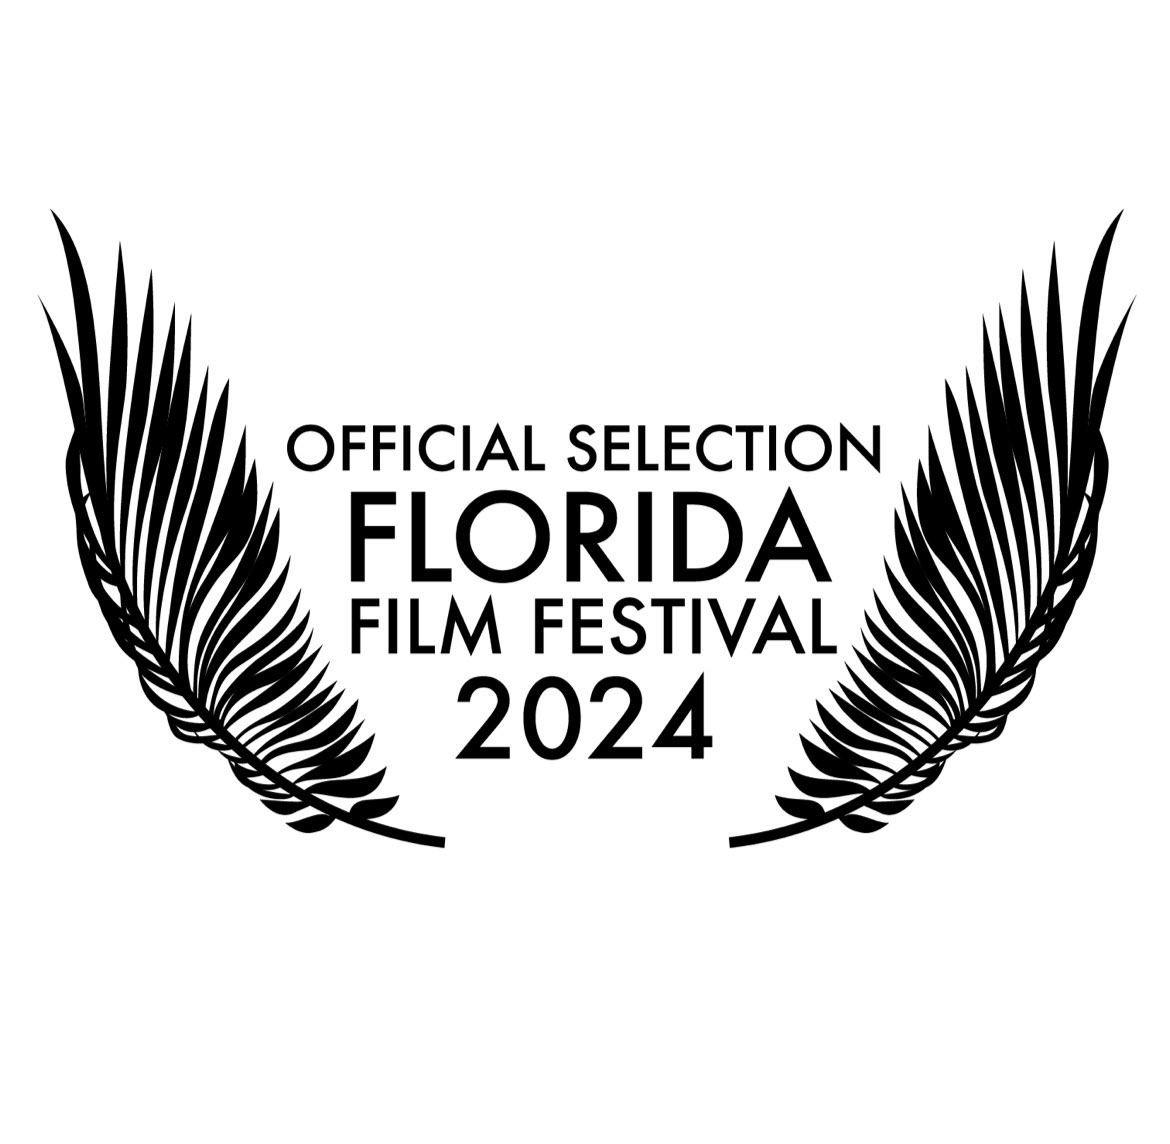 Hope to see you tomorrow at our short film, Unión de Reyes, @FloridaFilmFest screening: Sat, Apr 20th, 12:00 PM @ Regal Winter Park Village (Theater A) Nos vemos pronto, familia. 🇺🇸🇨🇺